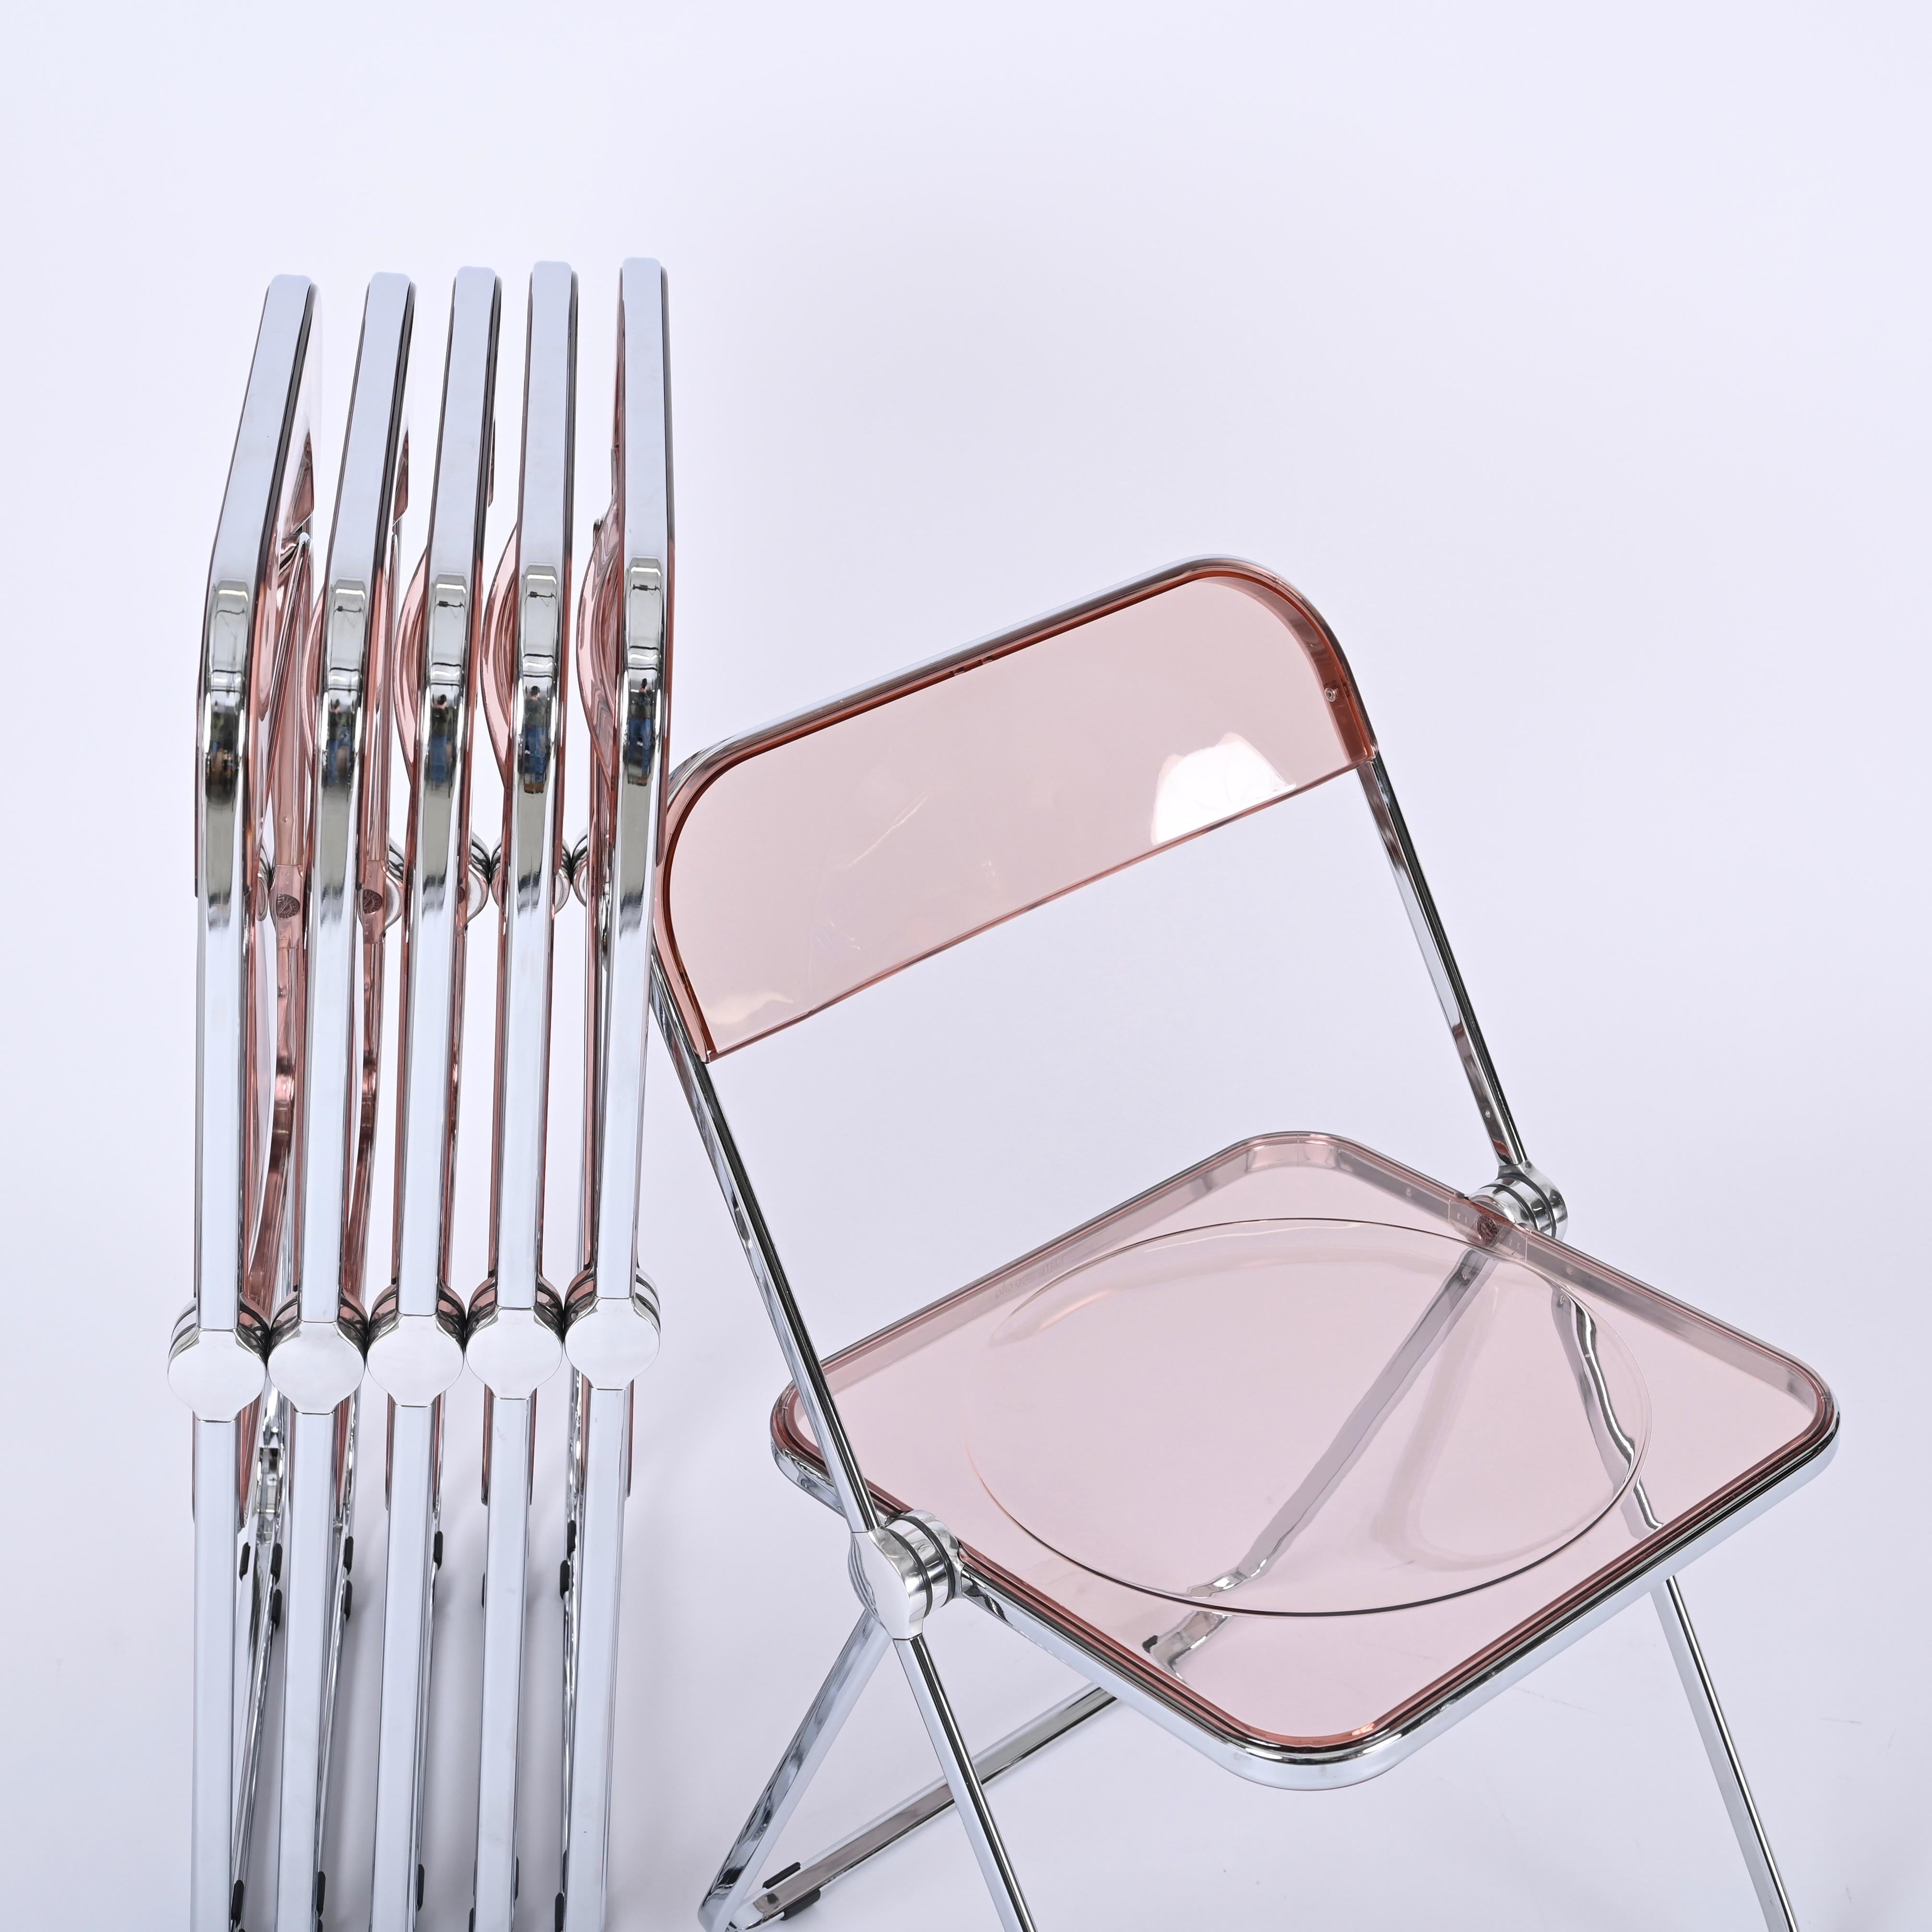 Set of 6 Lucite Pink and Chrome Plia Chairs, Piretti for Castelli, Italy 1970s For Sale 9